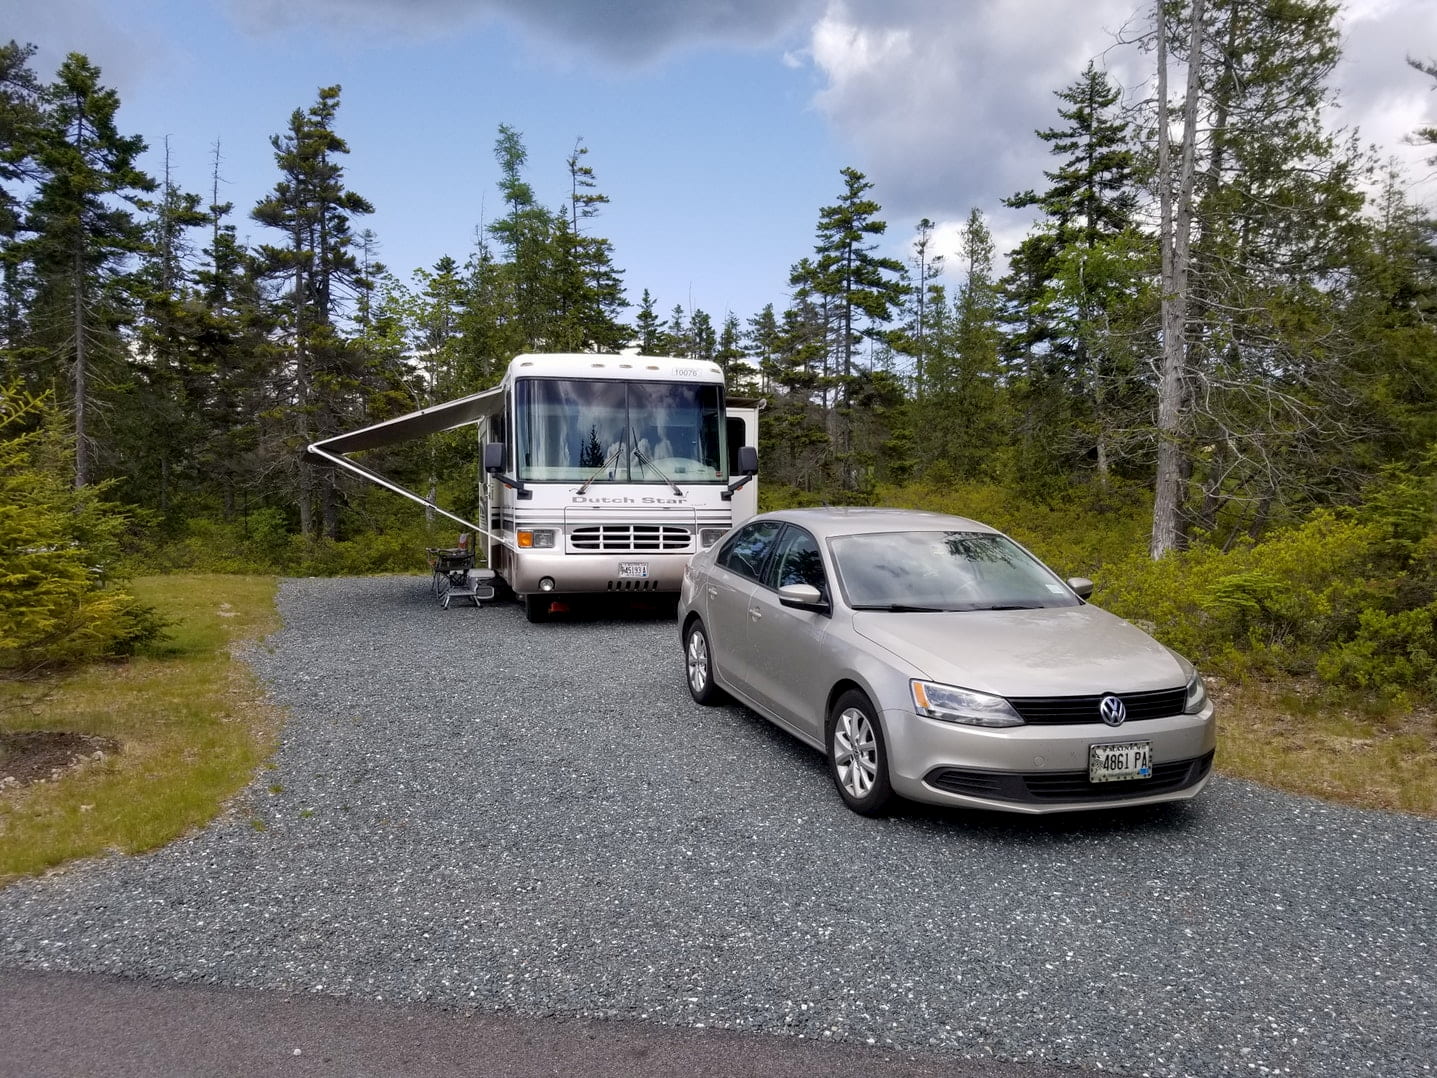 R.V. and car parked in gravel campsite beside pine trees.